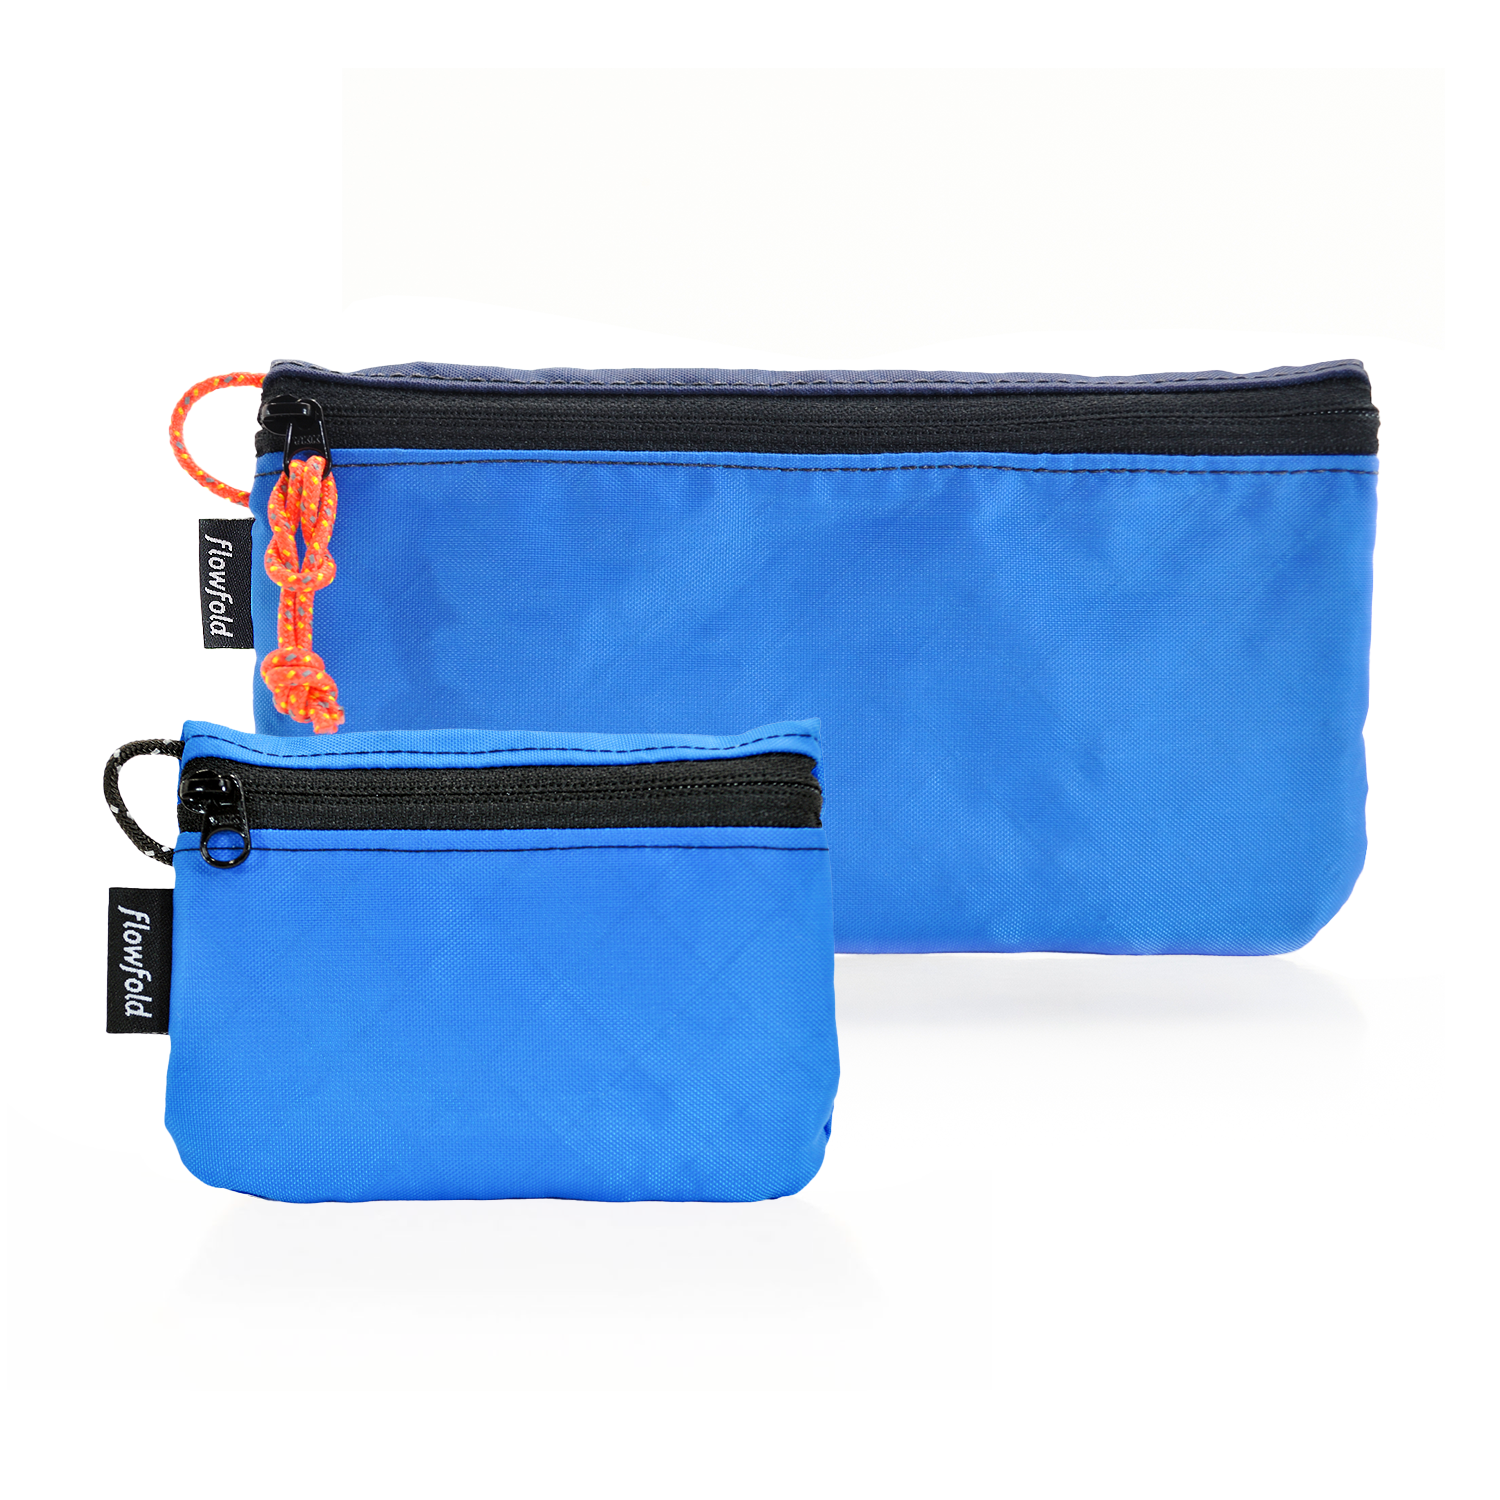 Flowfold Camden Kit: Creator Large Zippered Women's Wallet For Cash, Cards, and Phone + Essentialist Zipper Pouch, Recycled Blue/Navy